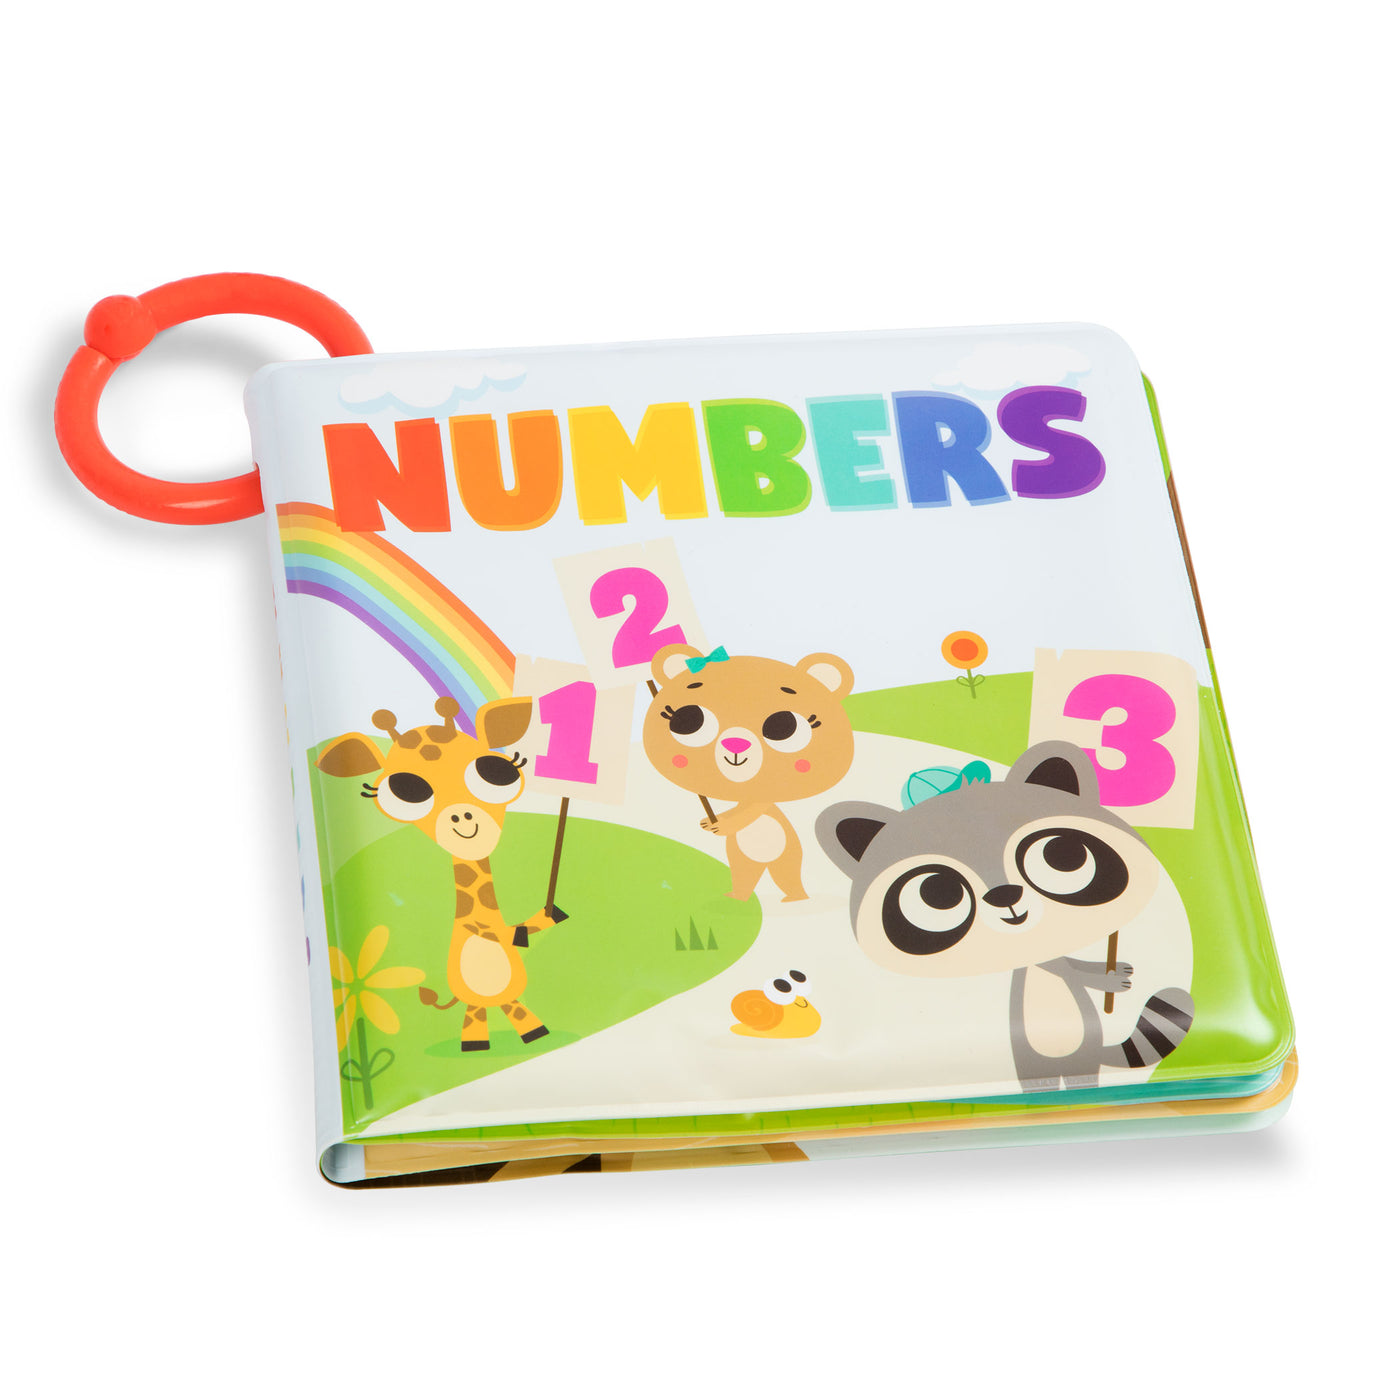 Numbers bath book with animals.